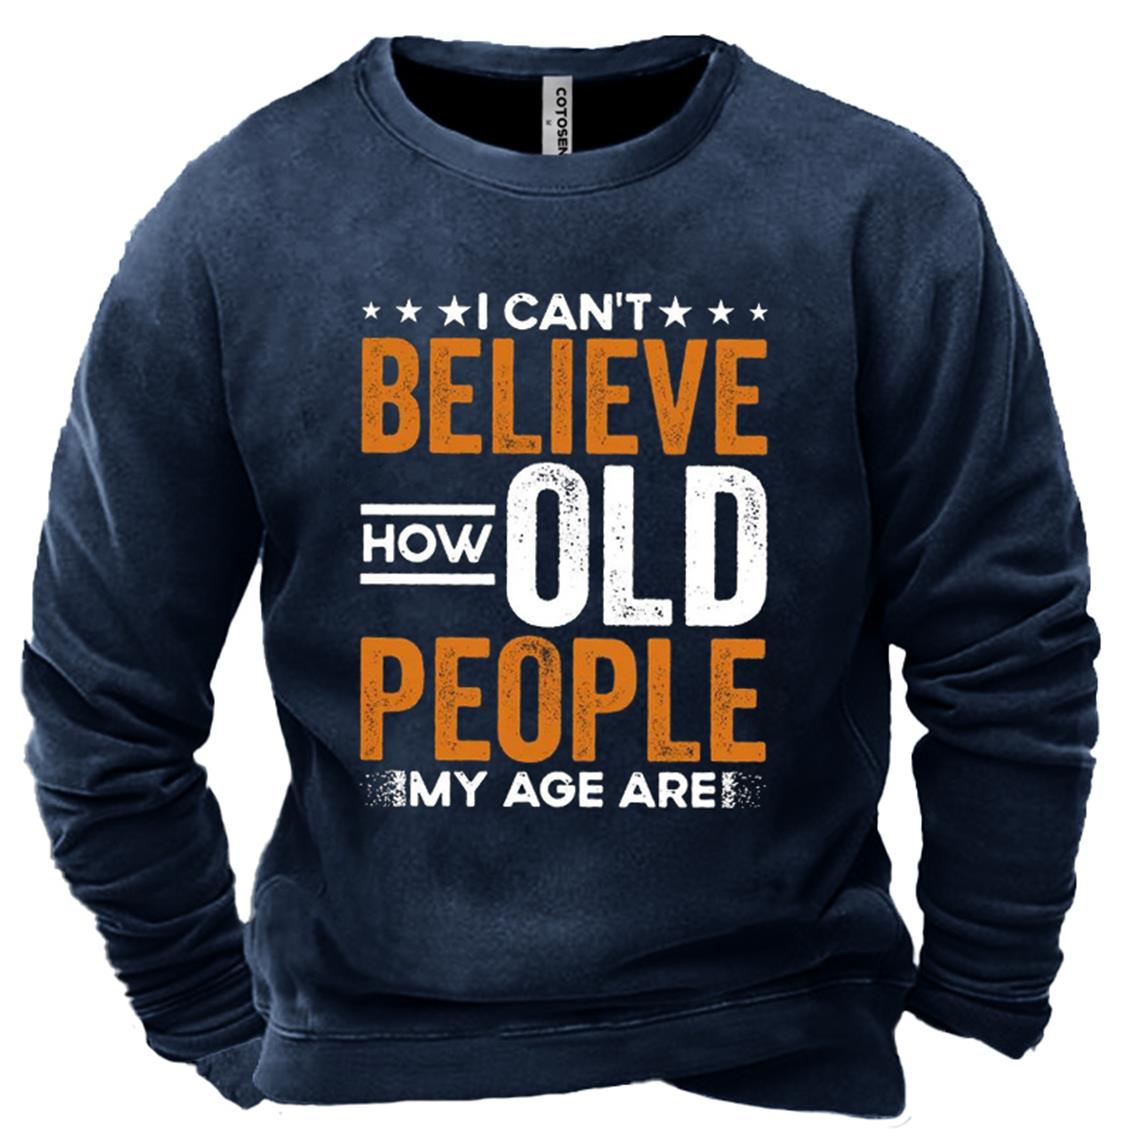 Men's I Can't How Chic Old People My Age Are Print Sweatshirt